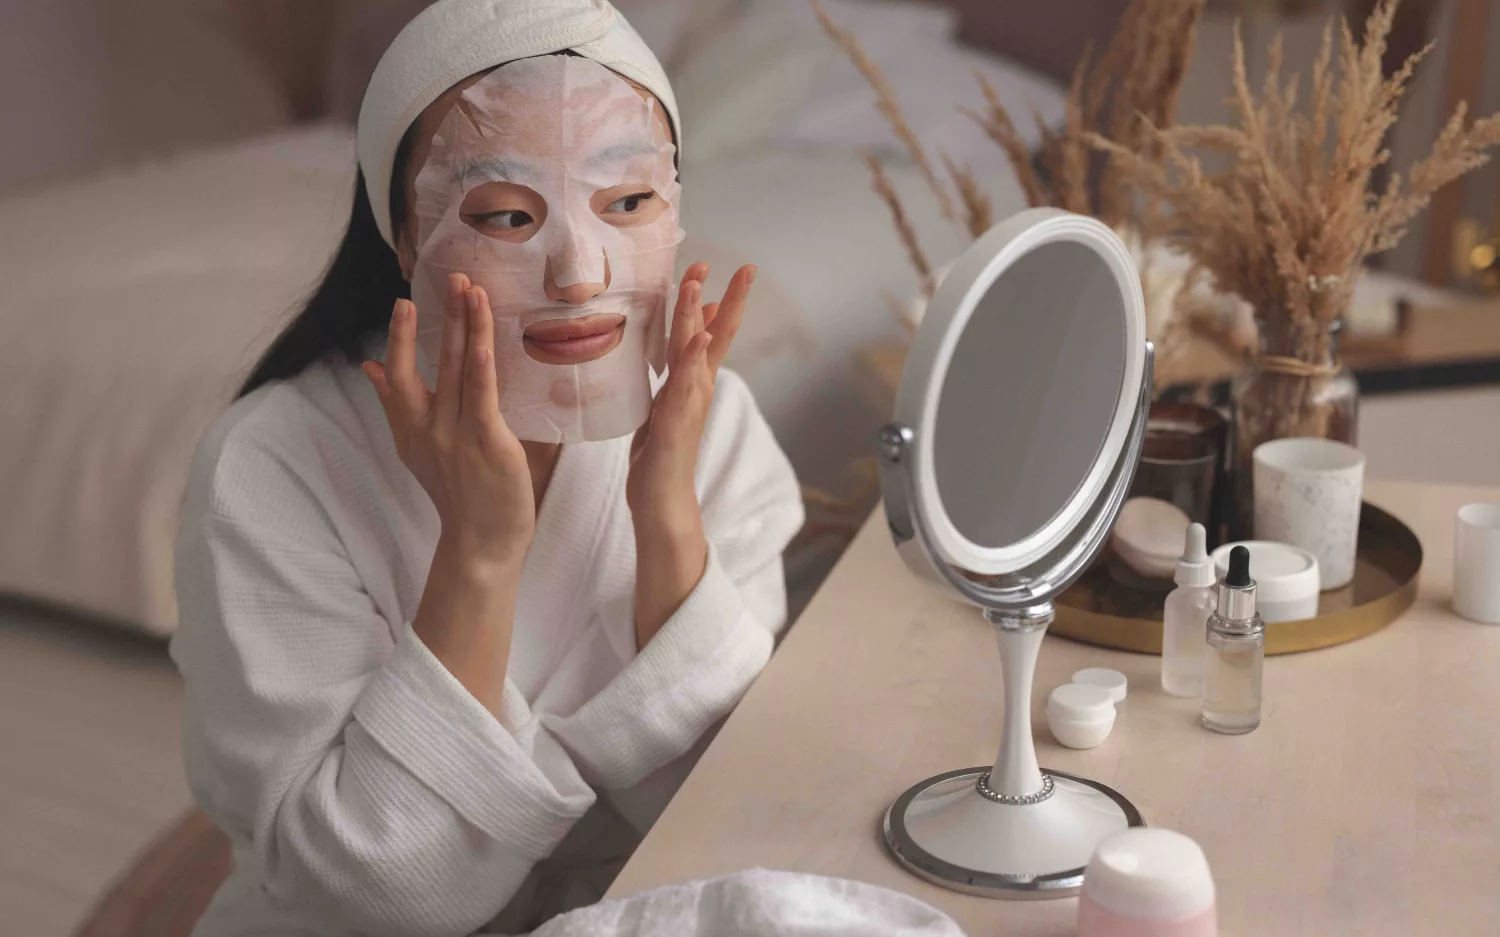 Face masks aren't just about achieving glowing skin, they're about self-care too.